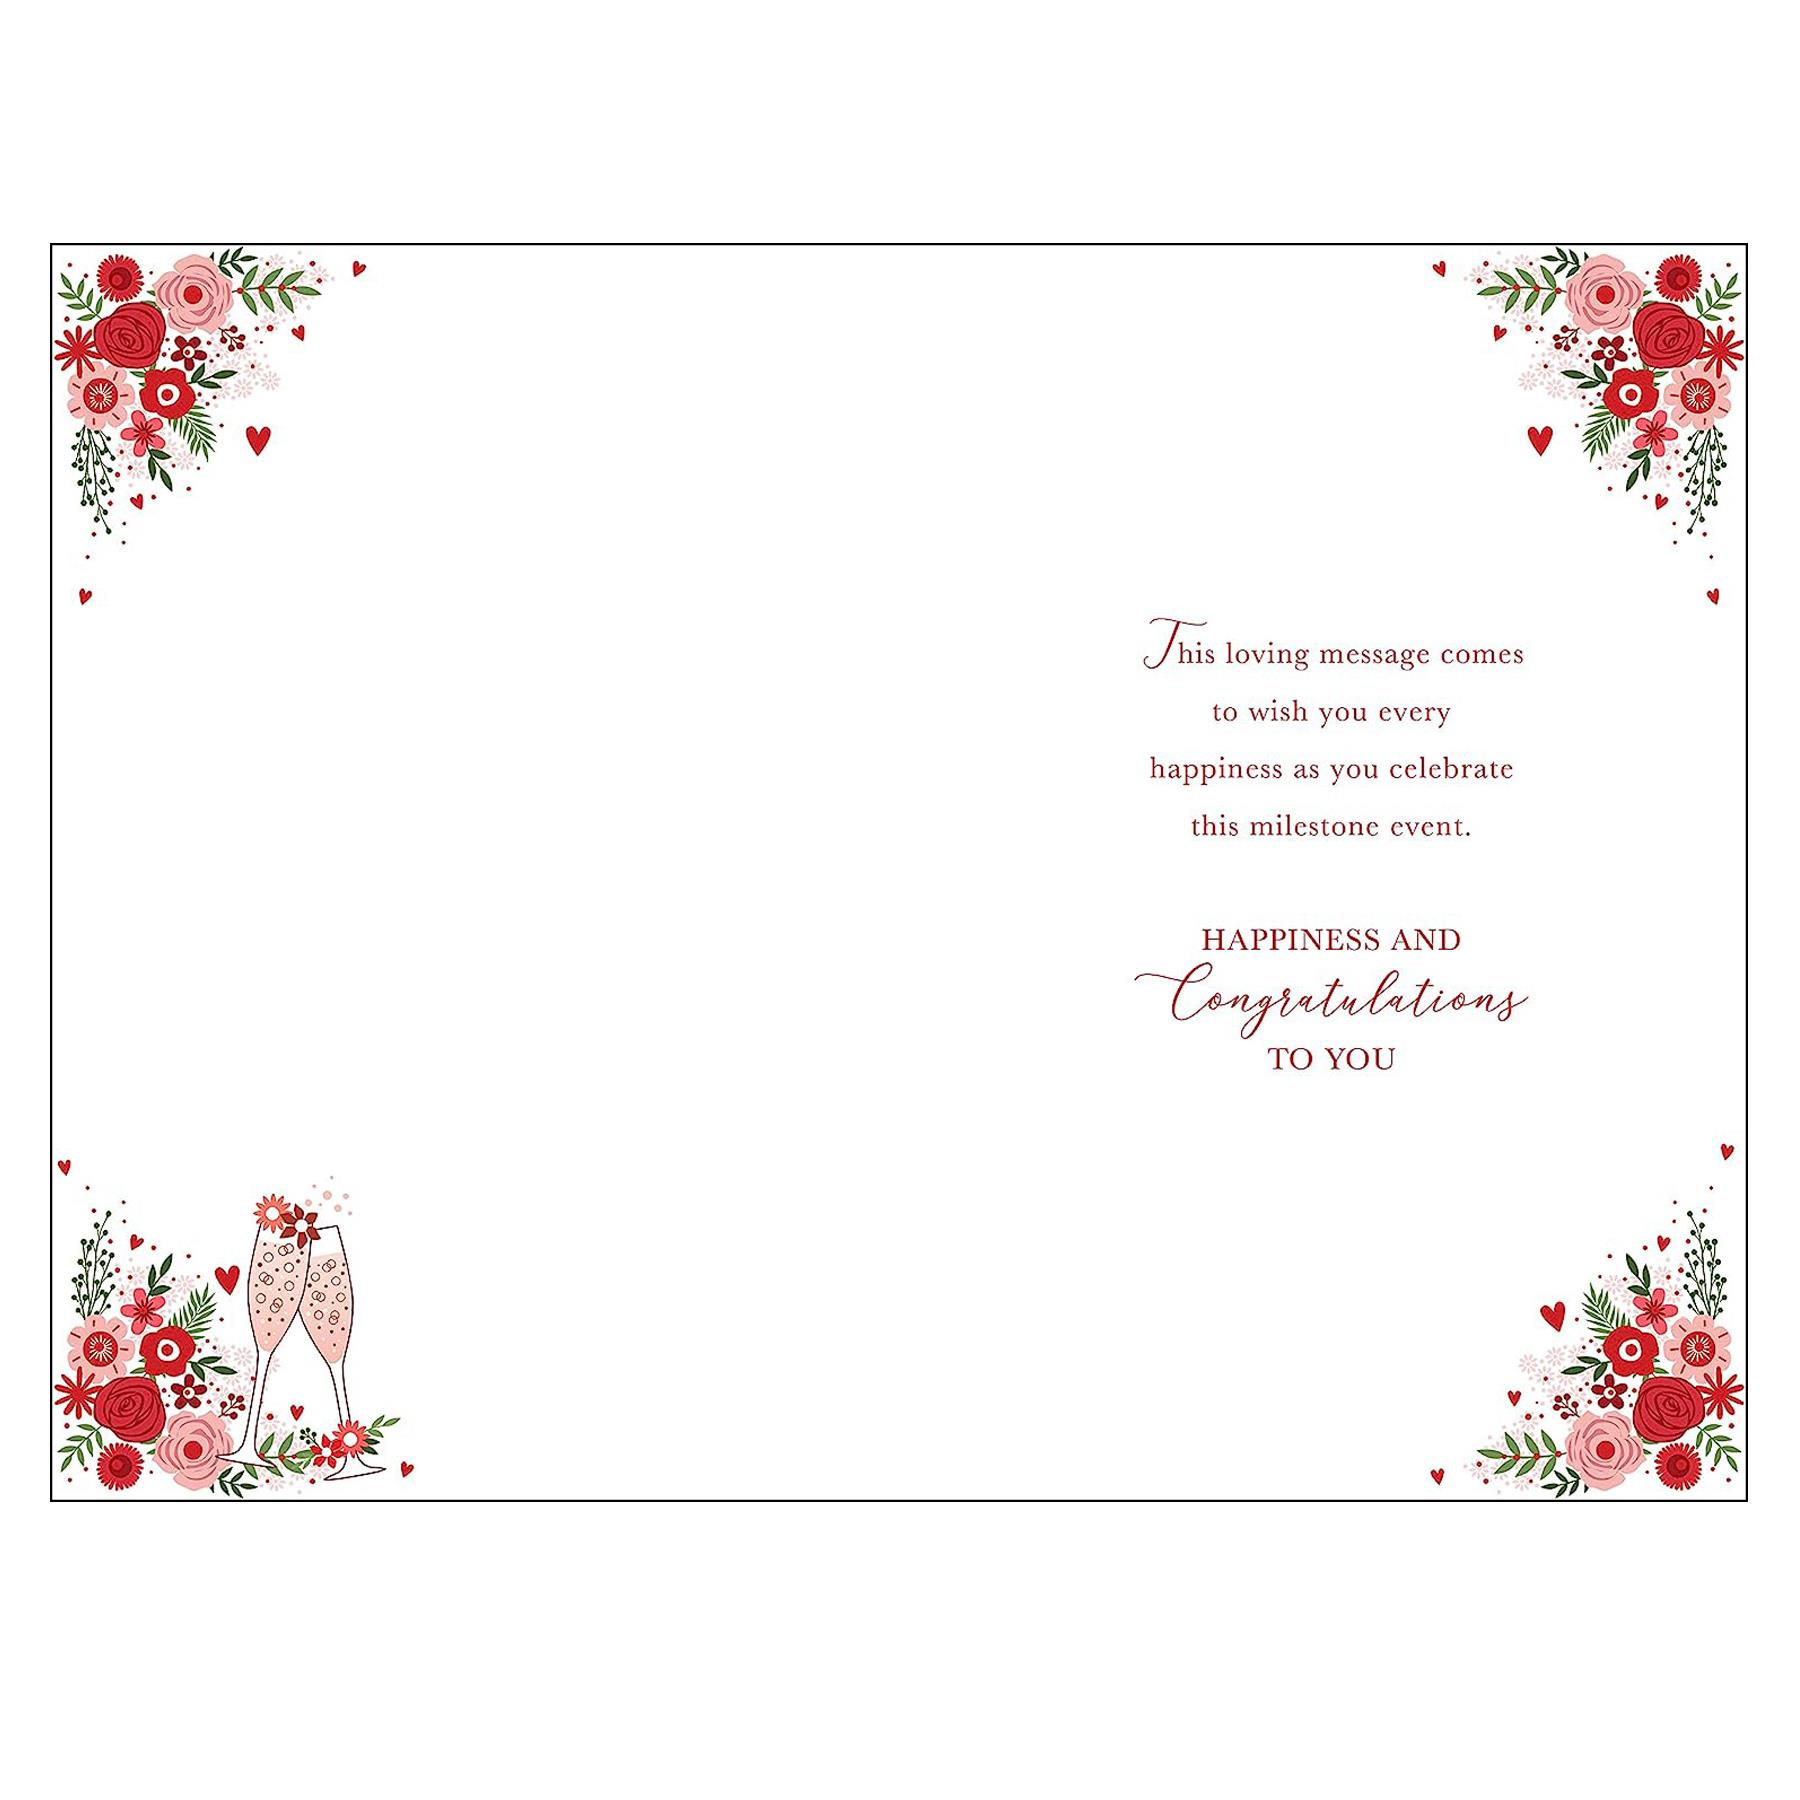 On your Ruby Wedding Anniversary Card with Foil Detail, Flowers and White Envelope